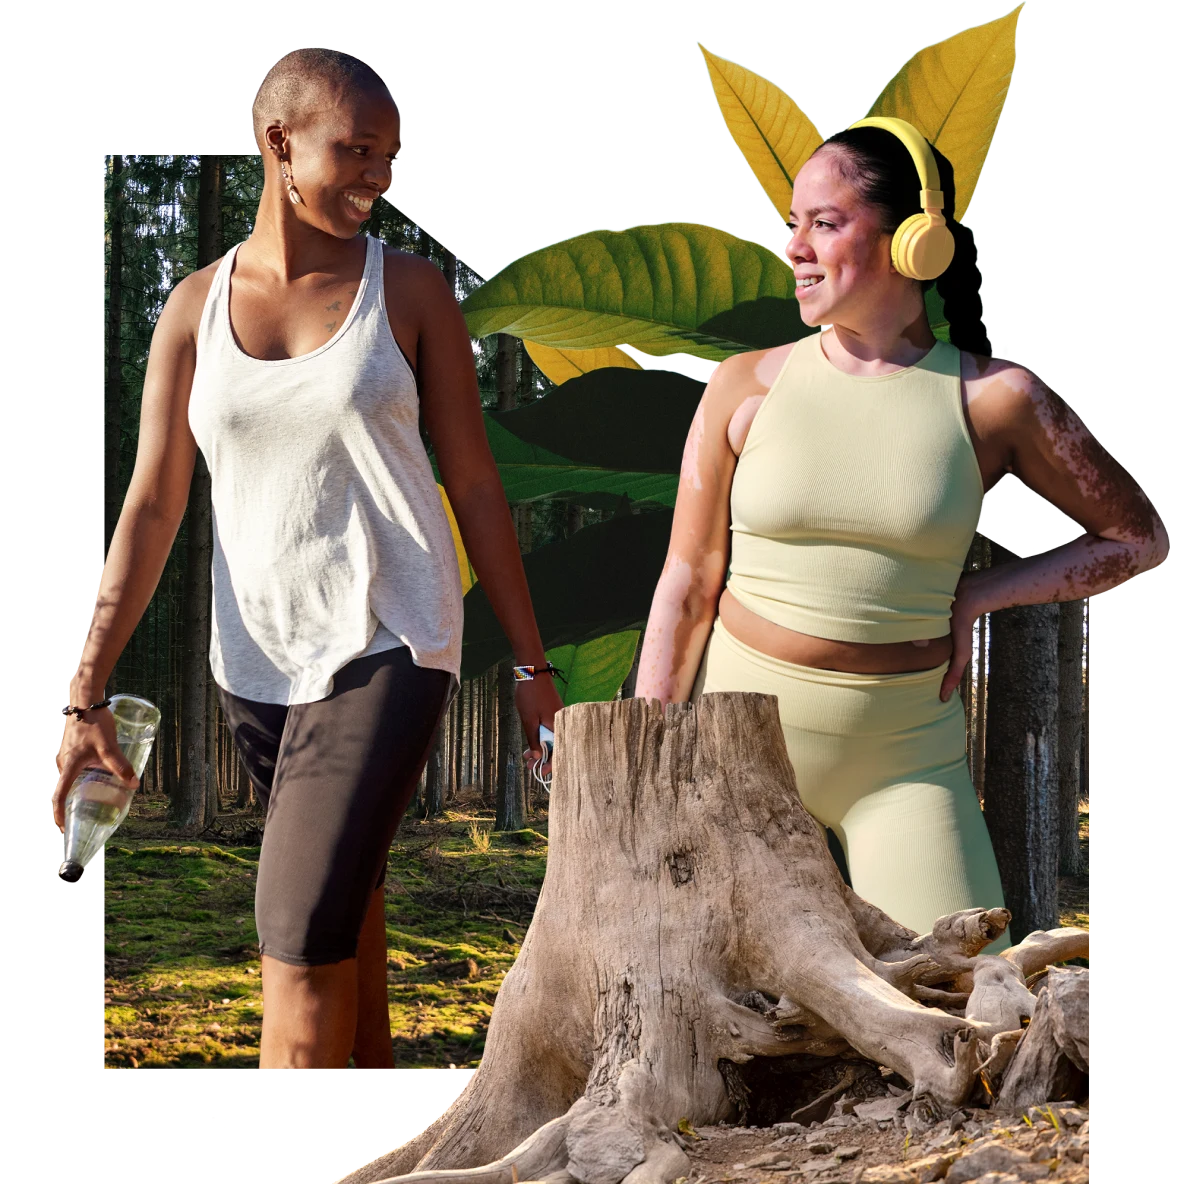 At left, smiling Black woman walks in exercise clothes, holding a bottle of water. At right, white woman in exercise clothes and headphones. Tree trunk in the foreground, plants and forest in the background.
